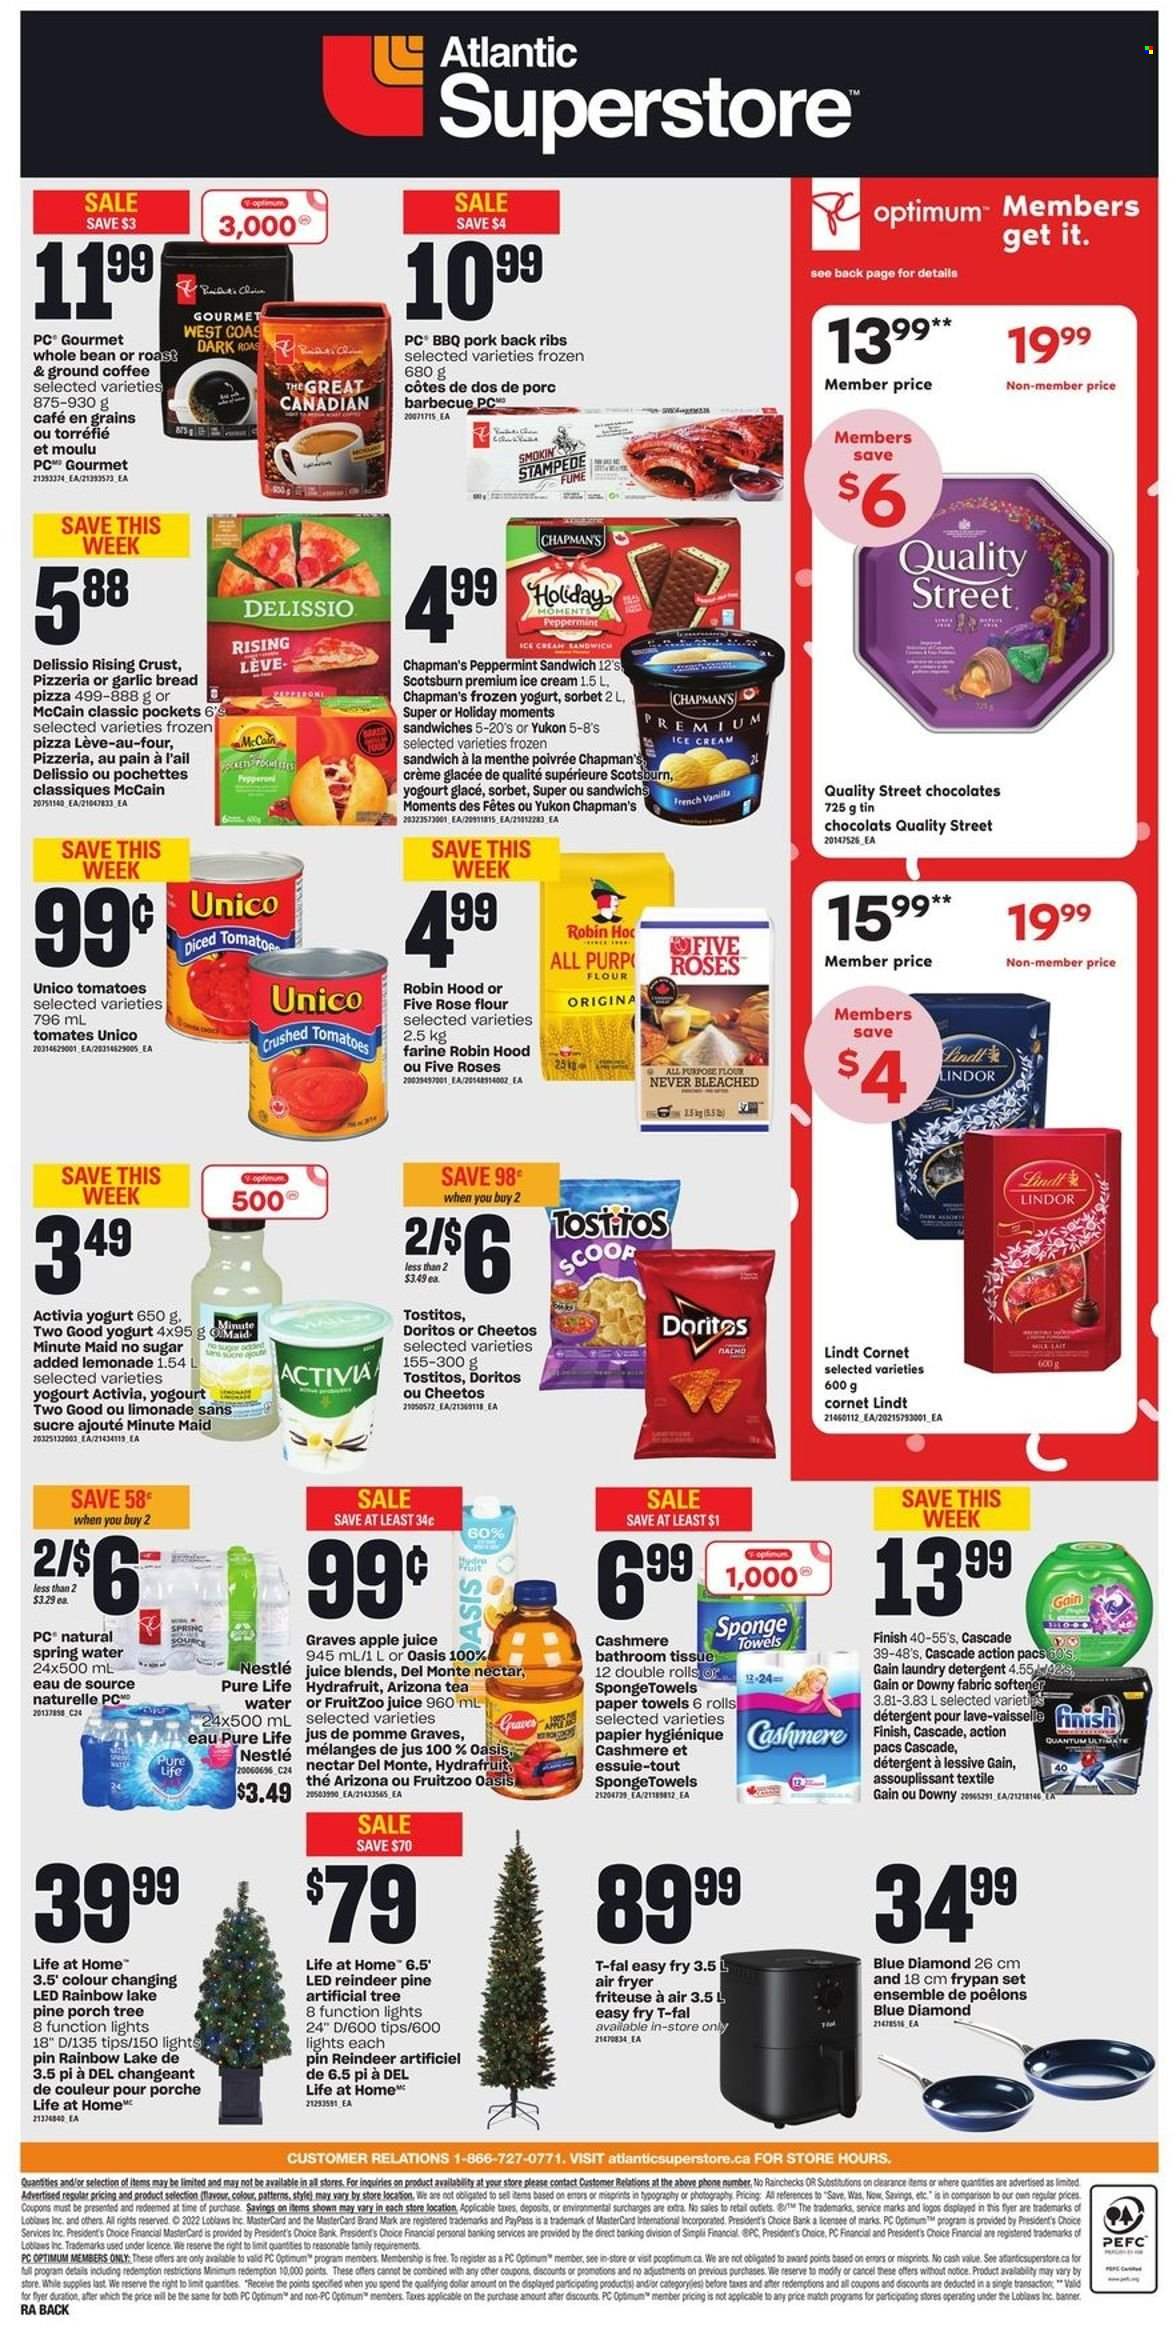 thumbnail - Atlantic Superstore Flyer - November 24, 2022 - November 30, 2022 - Sales products - bread, pizza, pepperoni, Président, yoghurt, Activia, ice cream, ice cream sandwich, McCain, Doritos, Cheetos, Tostitos, all purpose flour, flour, crushed tomatoes, diced tomatoes, Del Monte, Blue Diamond, apple juice, lemonade, juice, AriZona, fruit punch, spring water, Pure Life Water, tea, coffee, ground coffee, rosé wine, pork meat, pork ribs, pork back ribs, bath tissue, kitchen towels, paper towels, Gain, fabric softener, laundry detergent, Cascade, Downy Laundry, Optimum, Moments, detergent, Nestlé, Lindt, Lindor. Page 2.